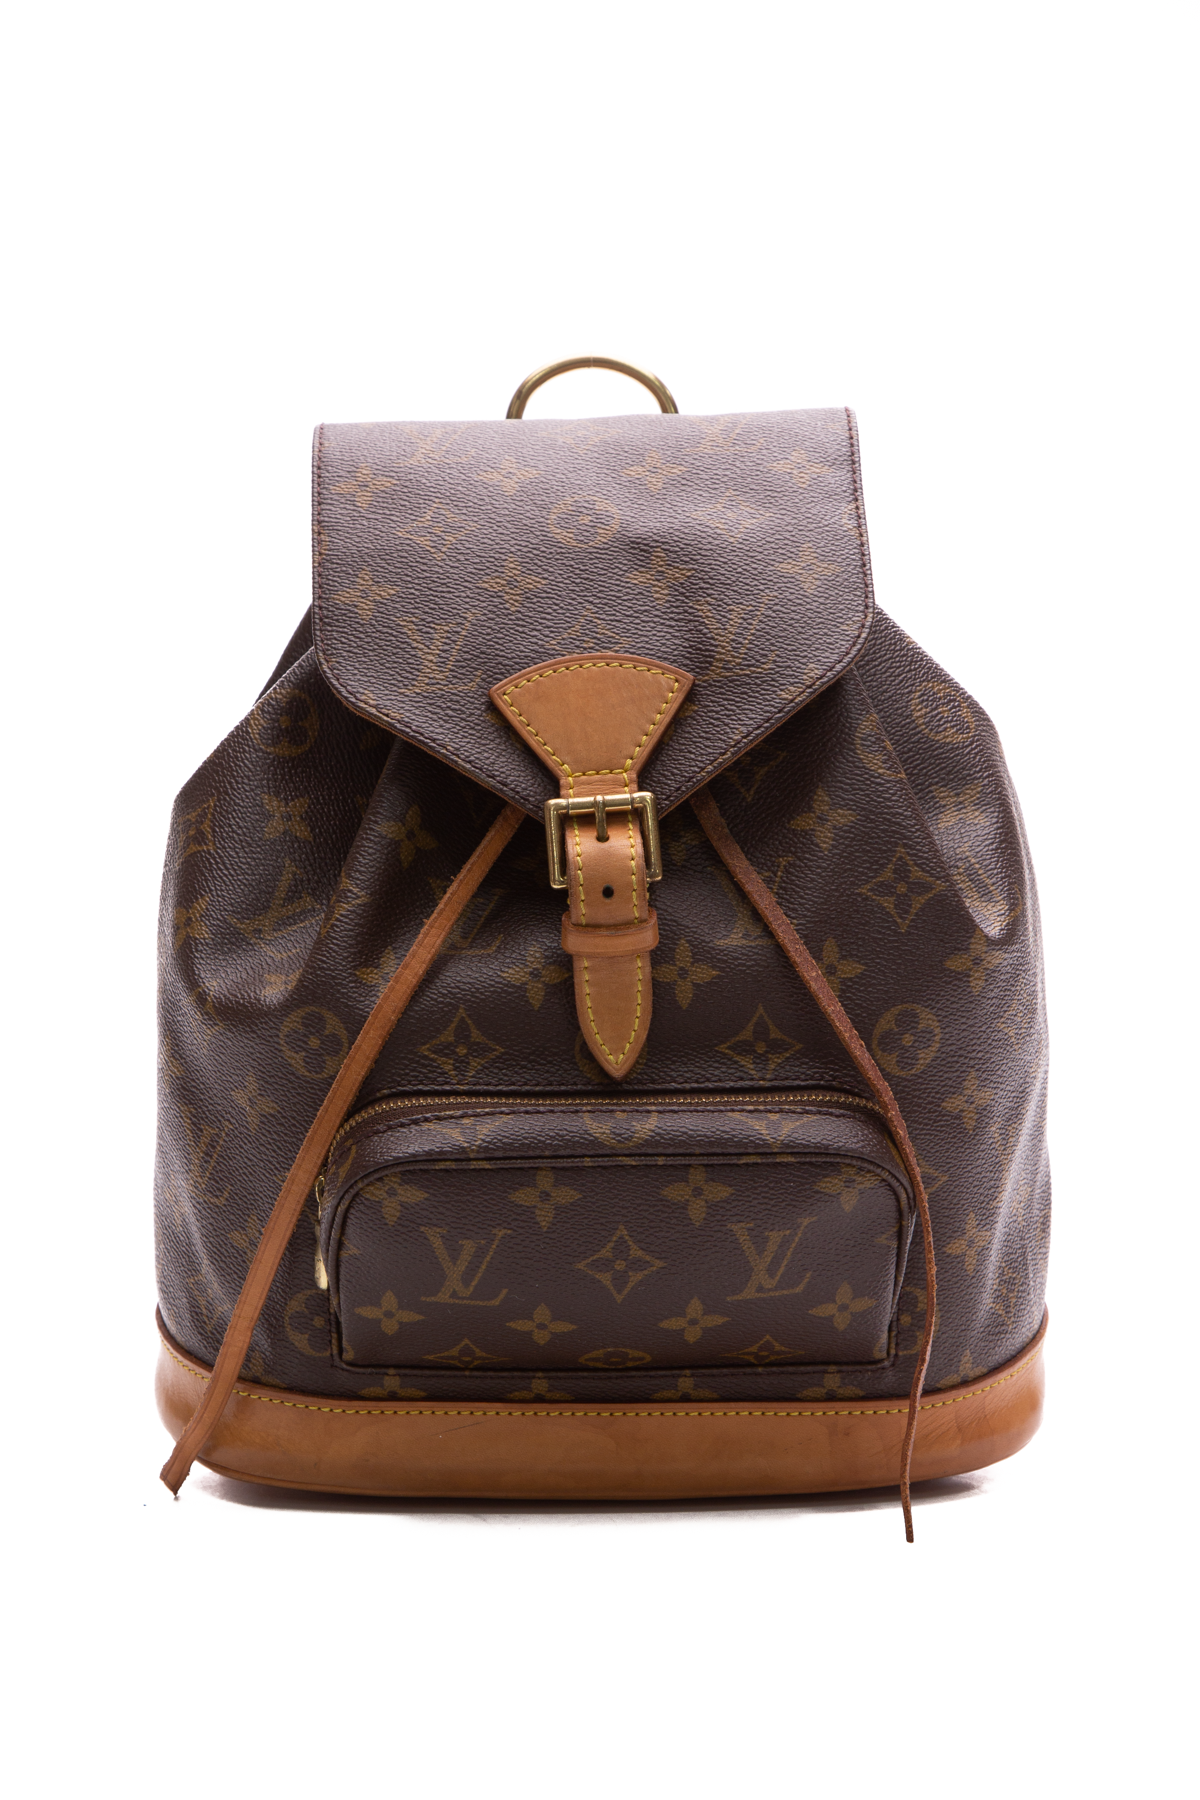 LV Montsouris PM Backpack